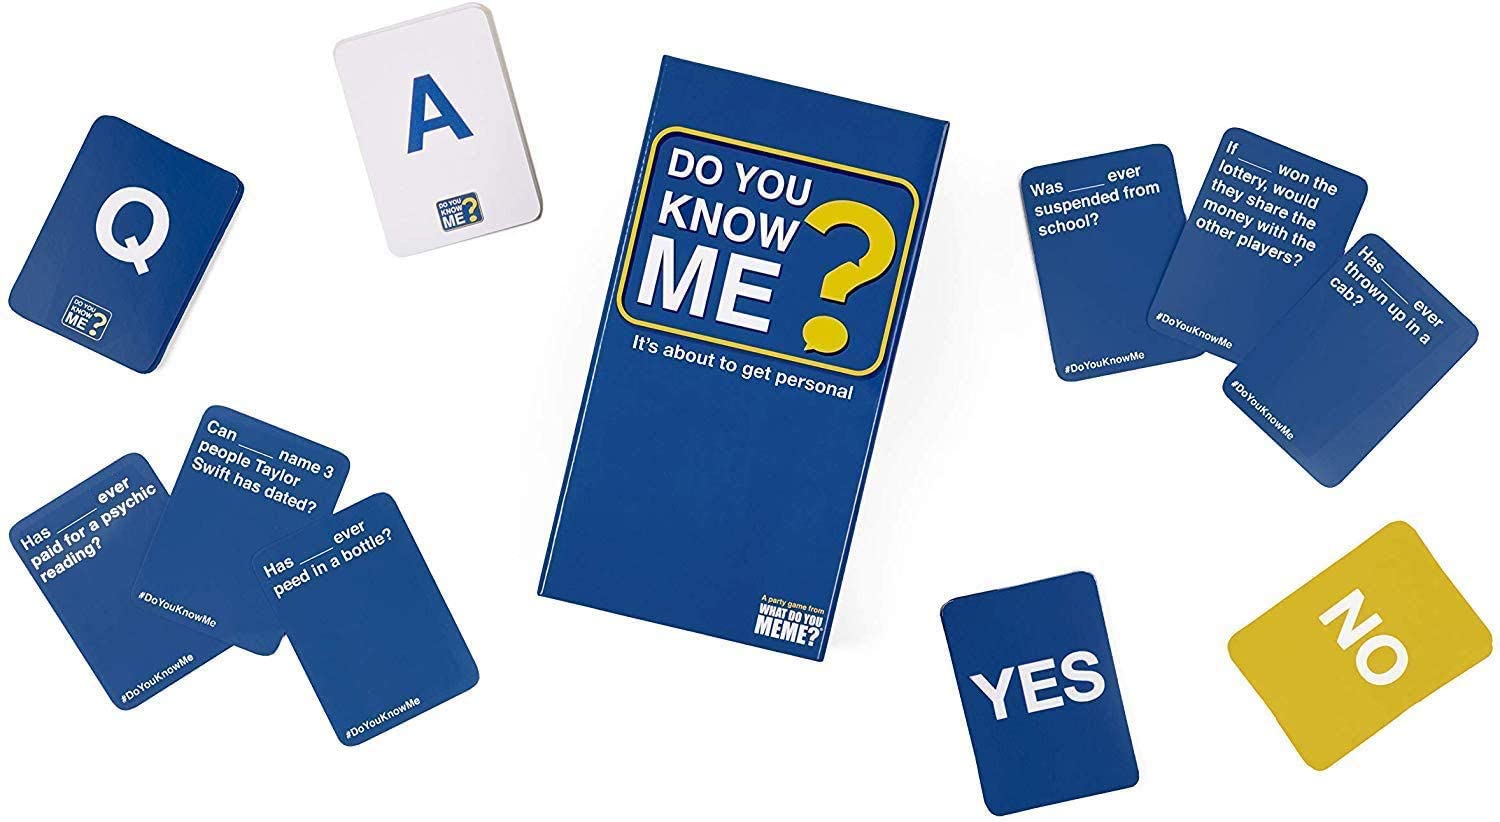 Do You Know Me? the Card Game that Puts You and Your Friends in the Hot Seat by What Do You Meme? - image 6 of 10